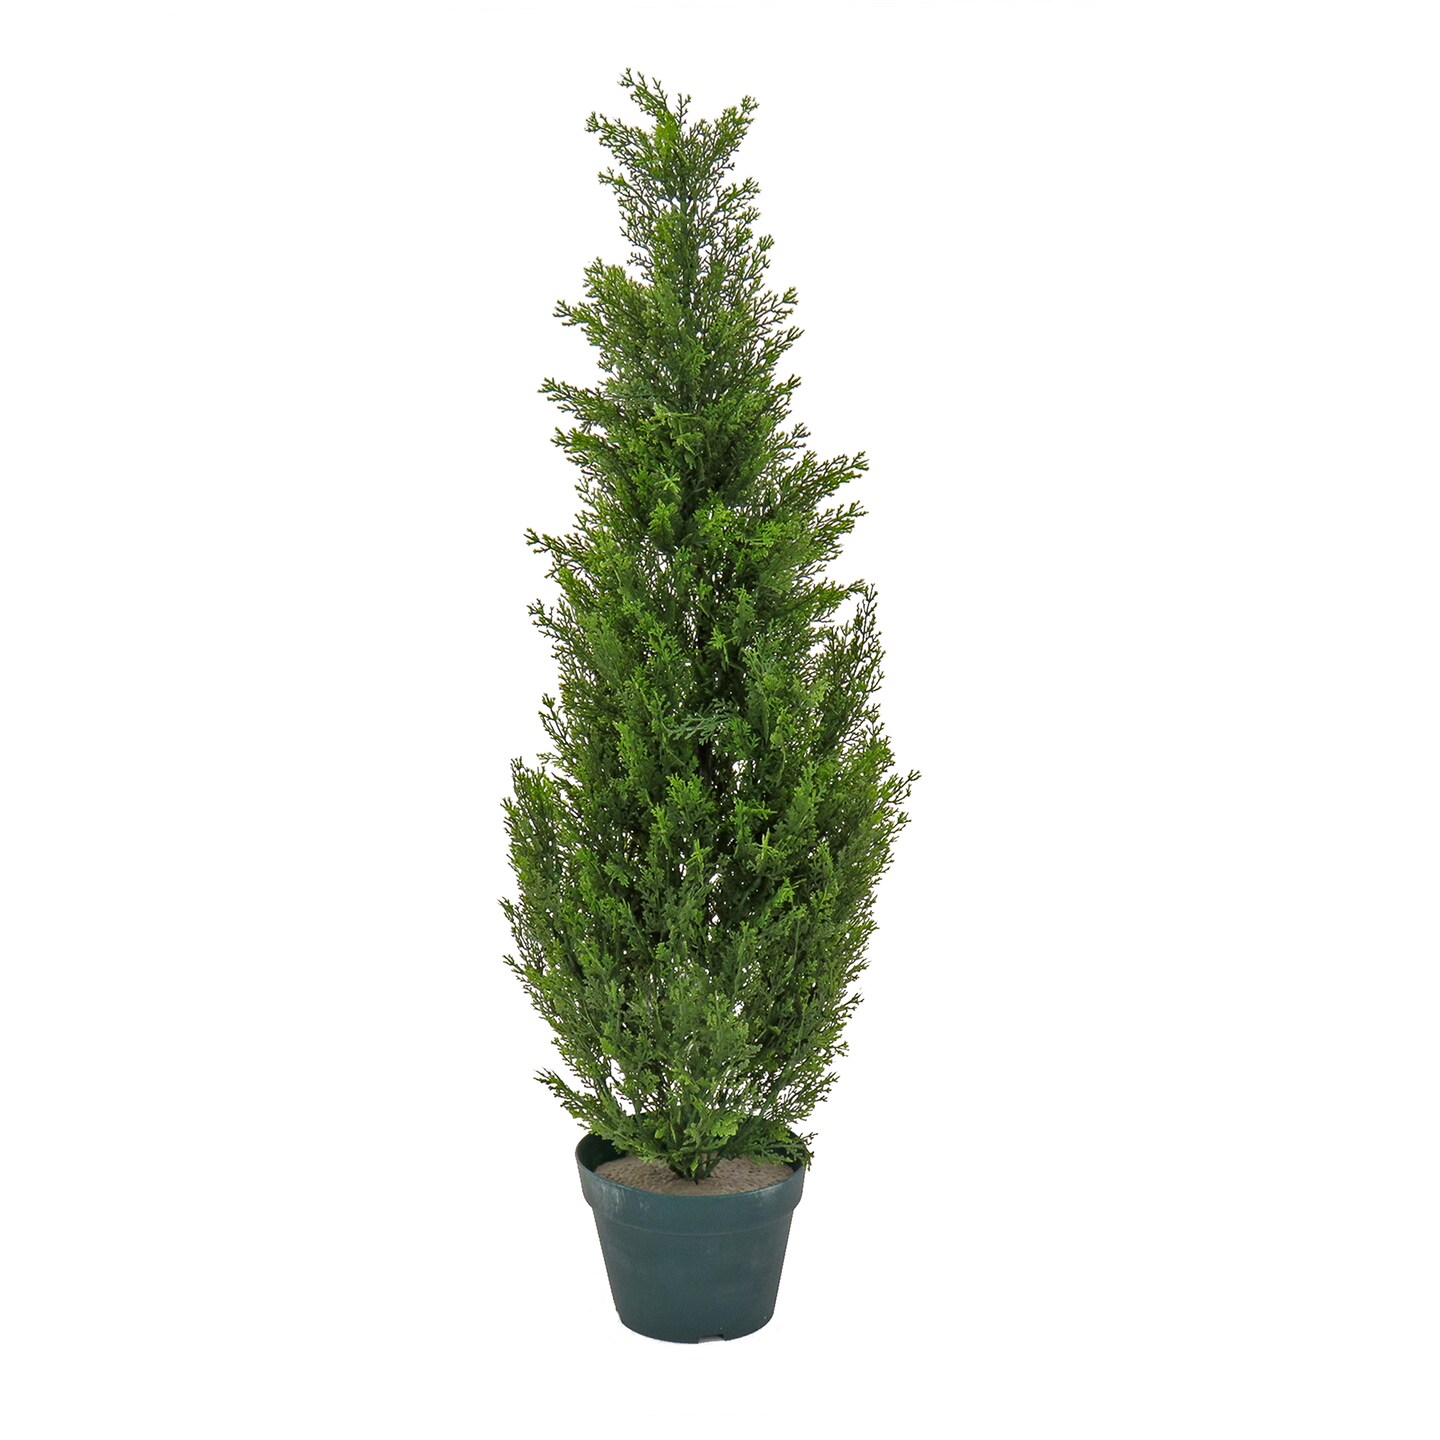 National Tree Company Artificial Mini Tree Decoration, Cedar, Includes Green Pot Base, Spring Collection, 38 Inches